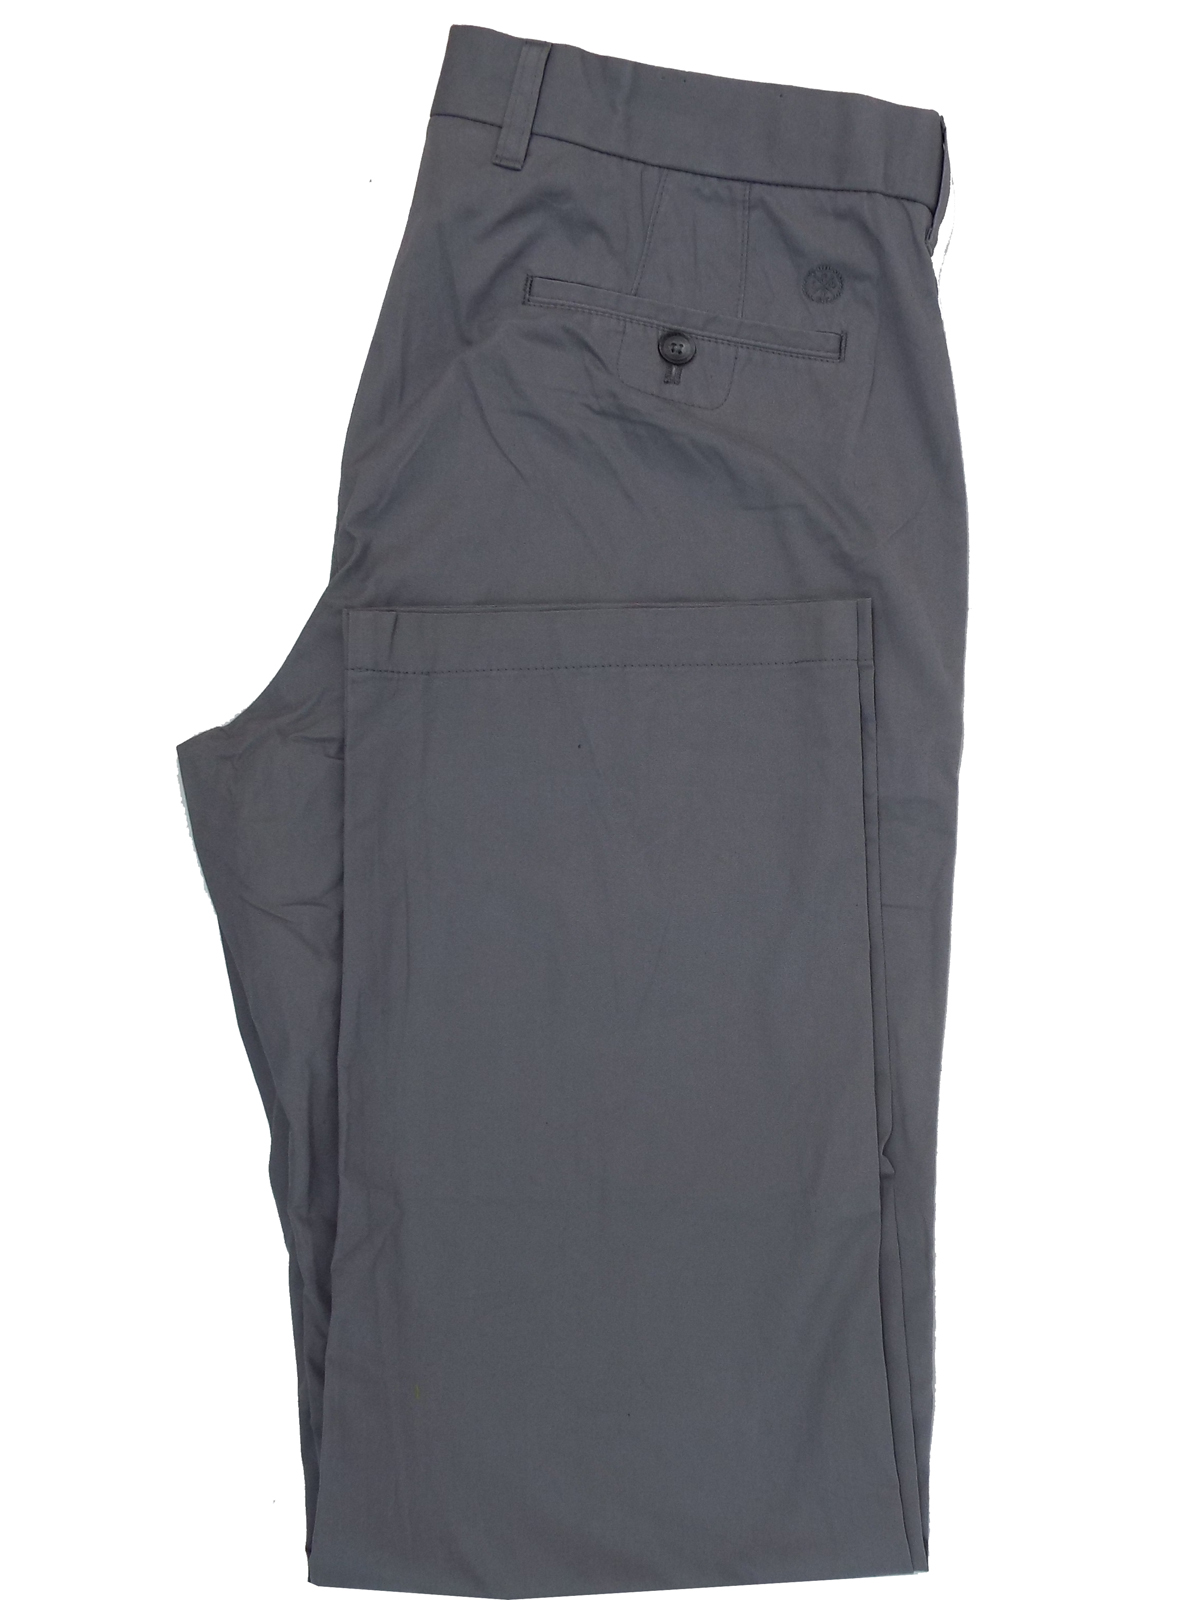 Marks and Spencer - - M&5 ASSORTED Mens Trousers - Waist Size 29 to 38 ...